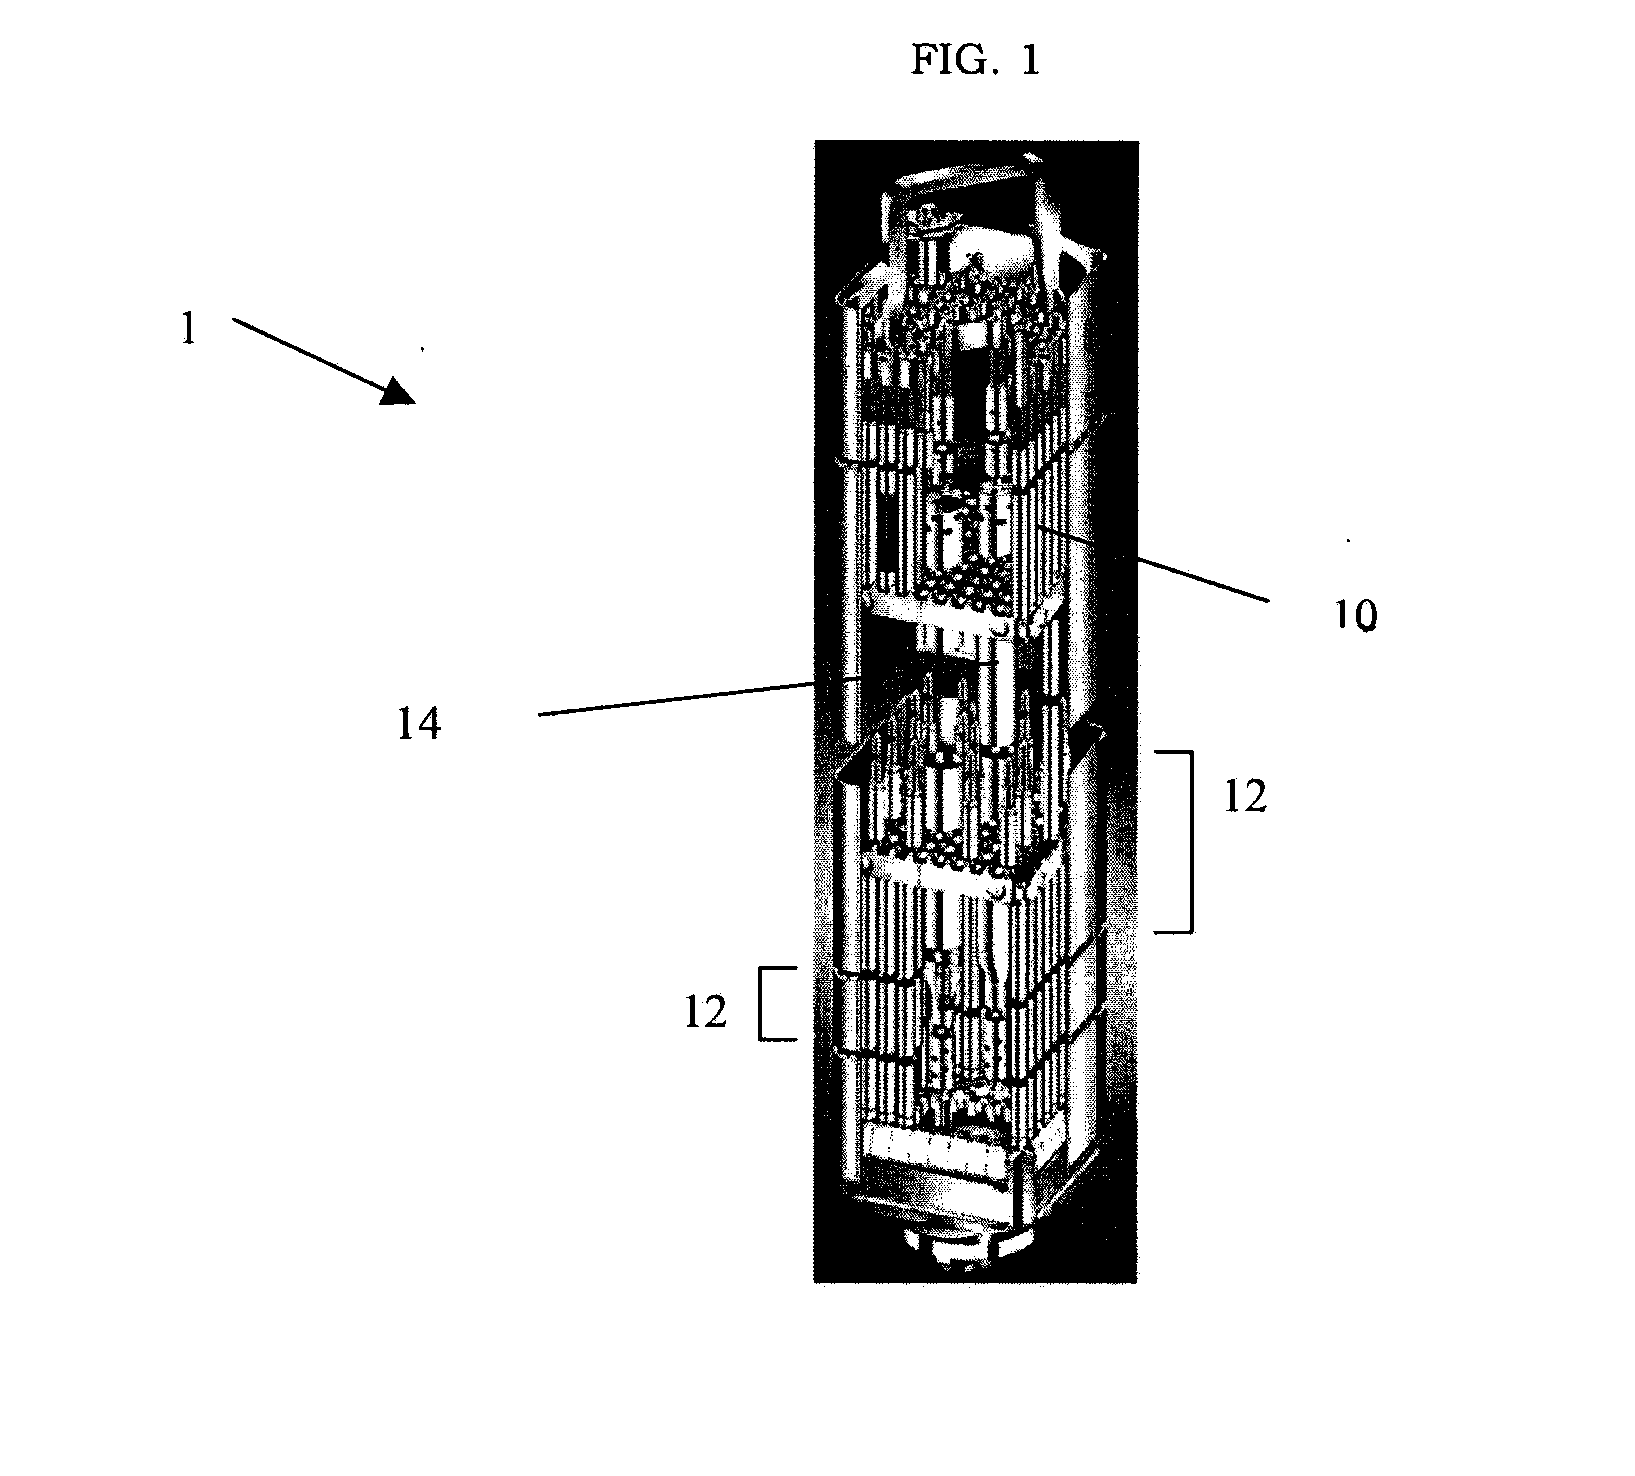 Method for pellet cladding interaction (PCI) evaluation and mitigation during bundle and core design process and operation